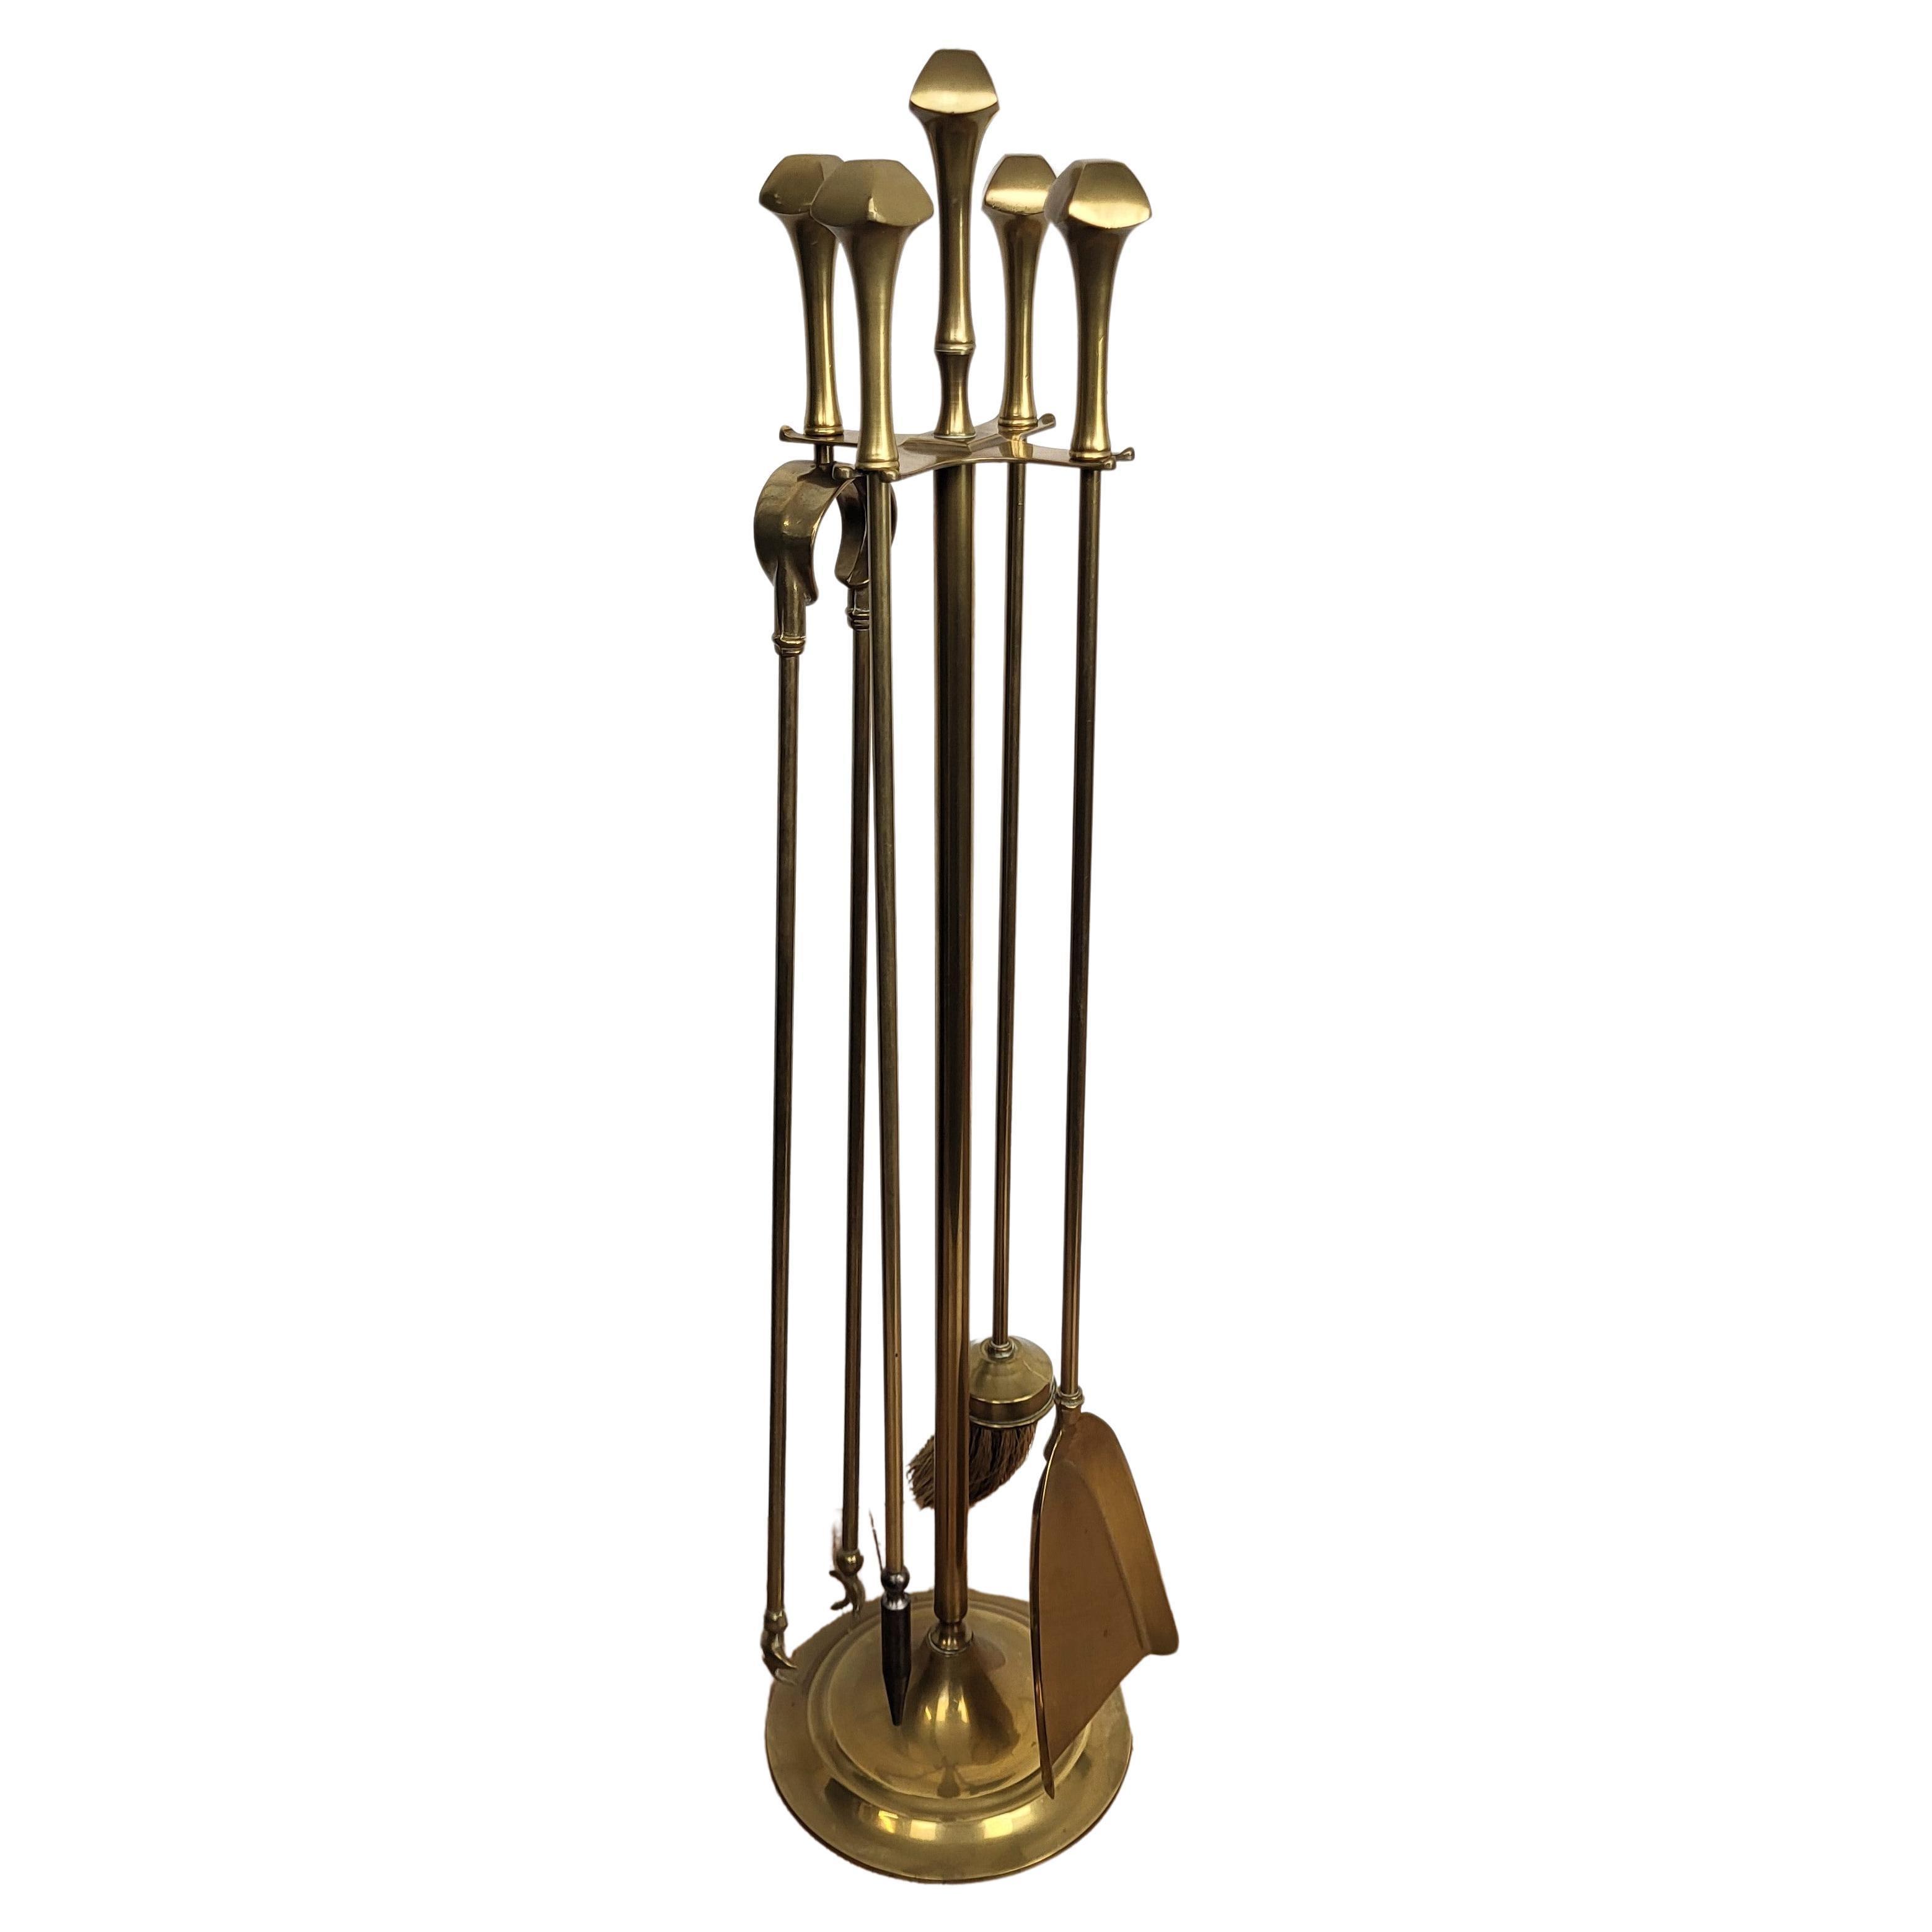 Italian Four-Piece Brass Vintage Fireplace Fire Tool Set with Stand For Sale